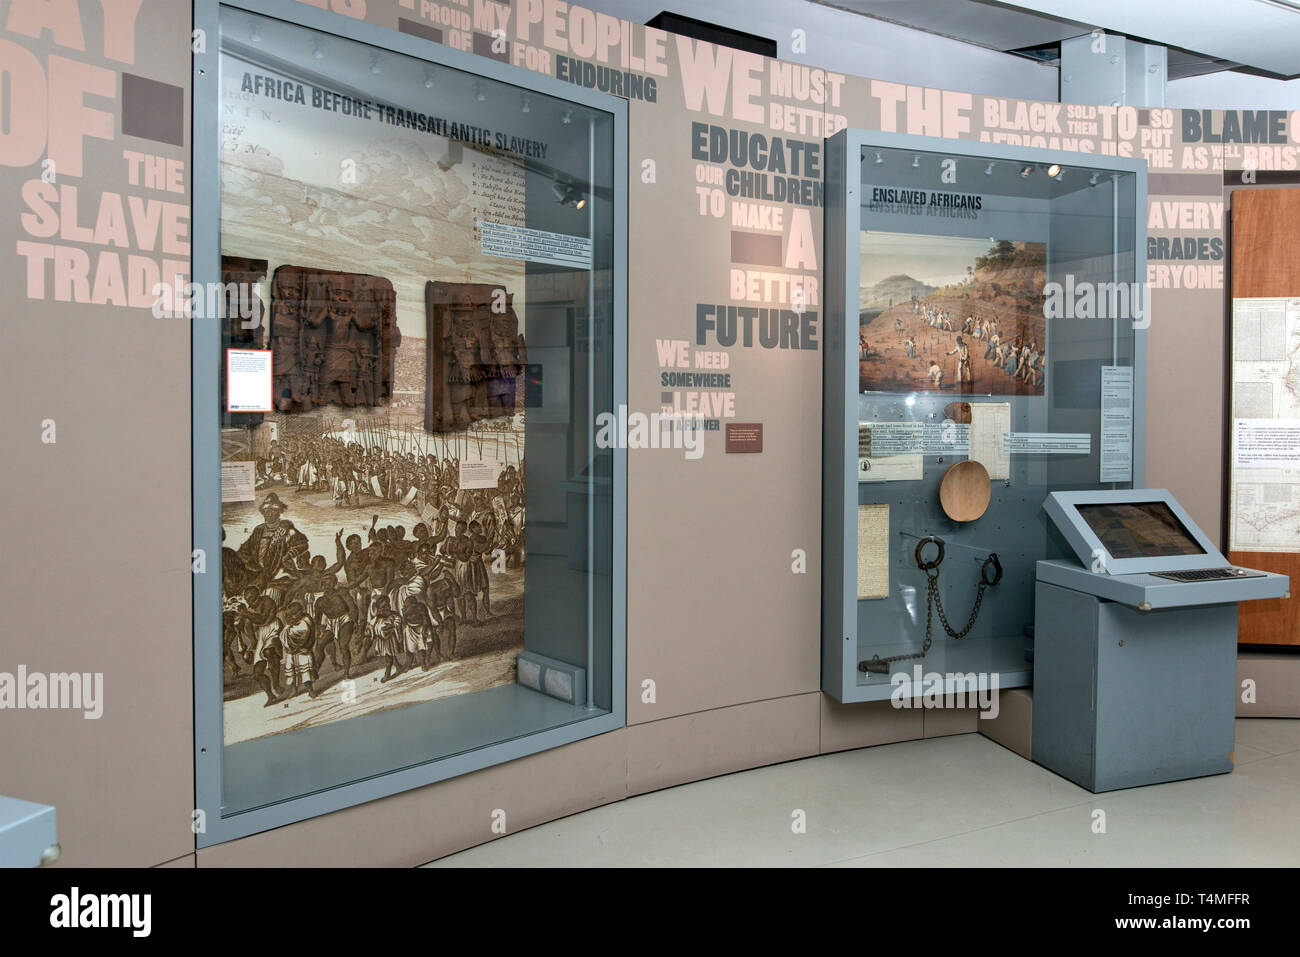 Slavery Exhibition at M Shed, Bristol showing slave shackles and a plan of the layout  of a slave ship etc. Stock Photo